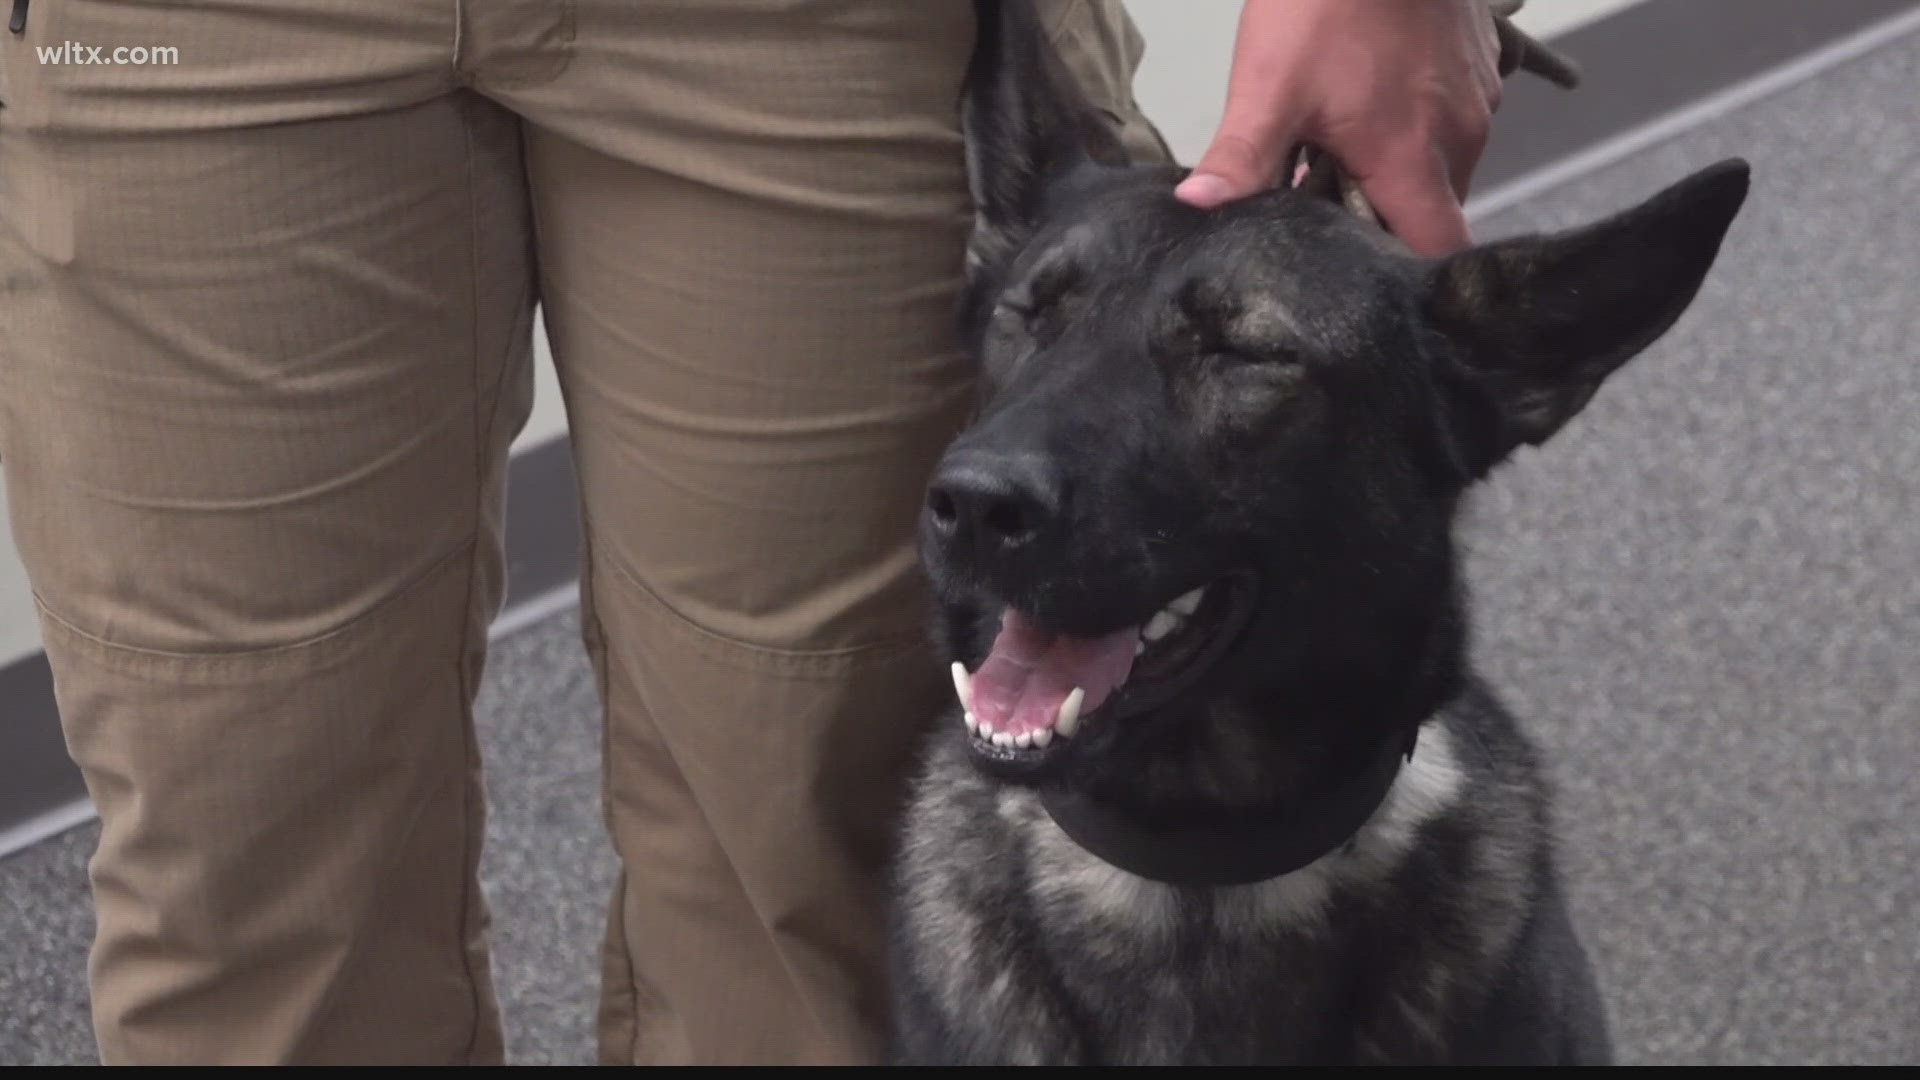 K9 Mazie is the newest member of the Kershaw County Sheriff's Department.